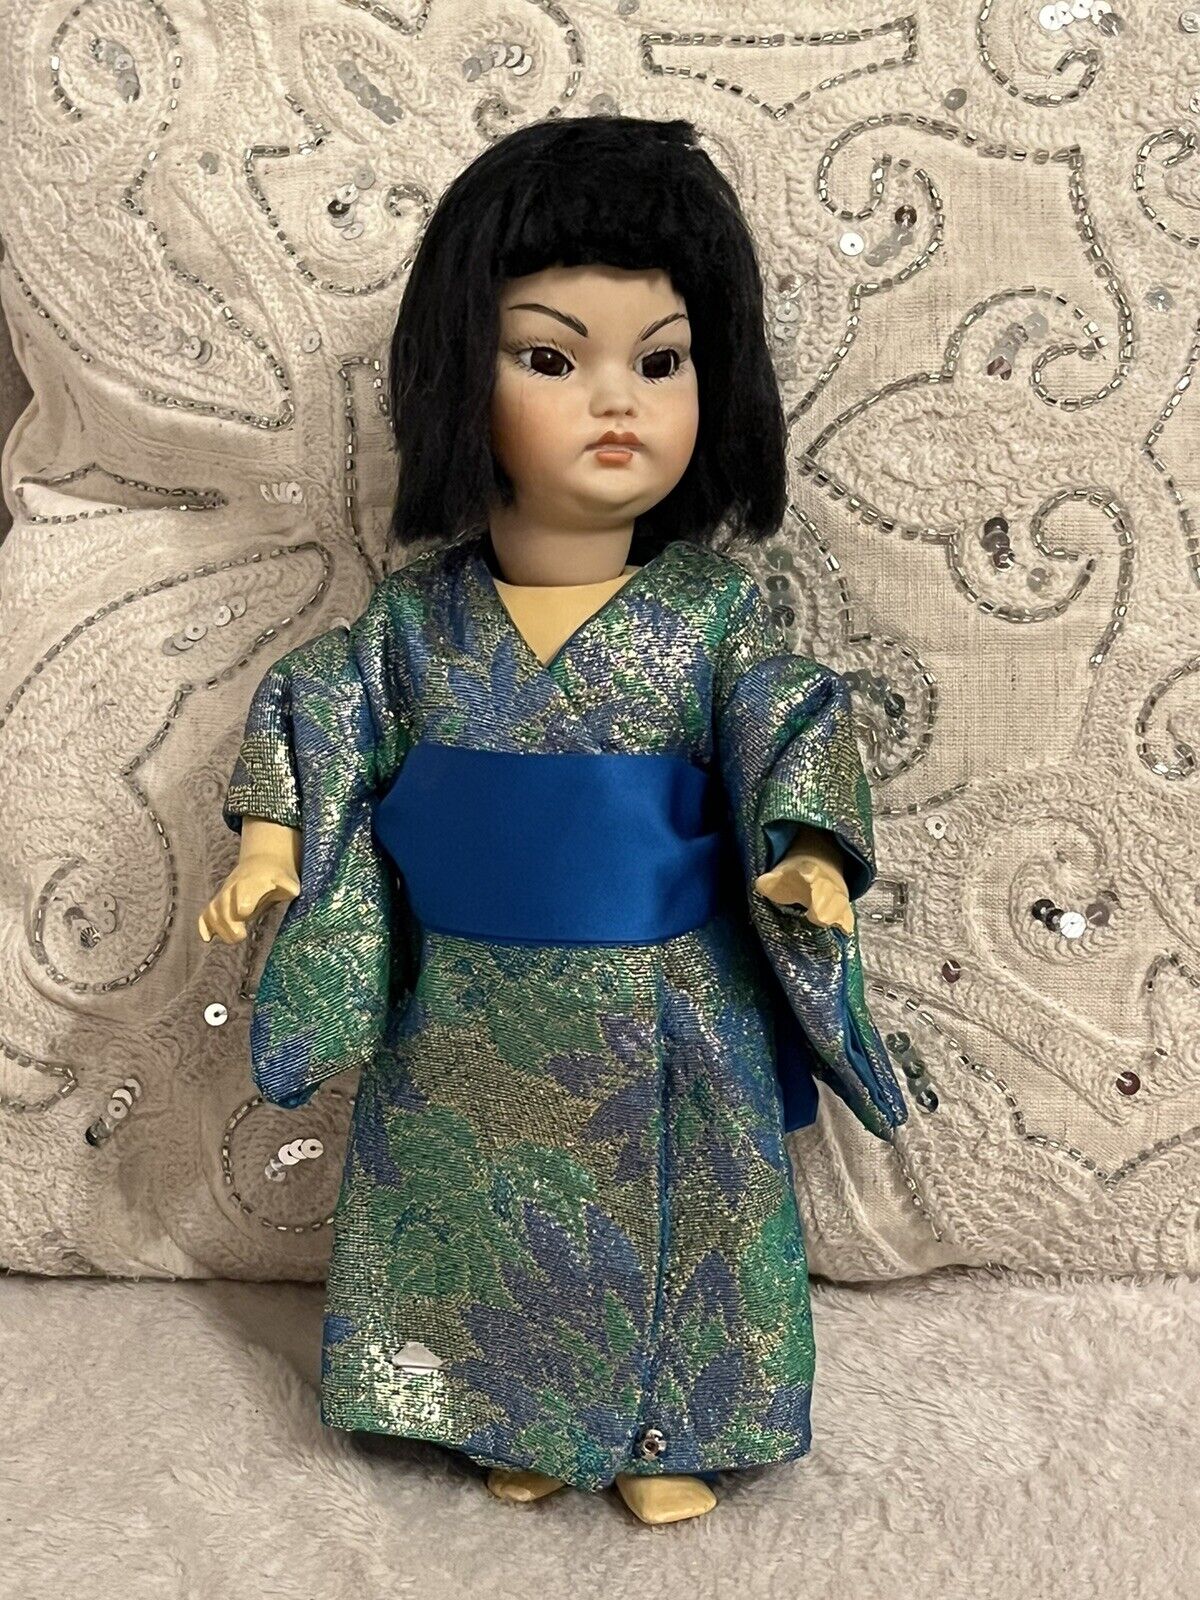 Well Made Vintage Asian Artist Antique Reproduction 10” Doll Nicely Dressed